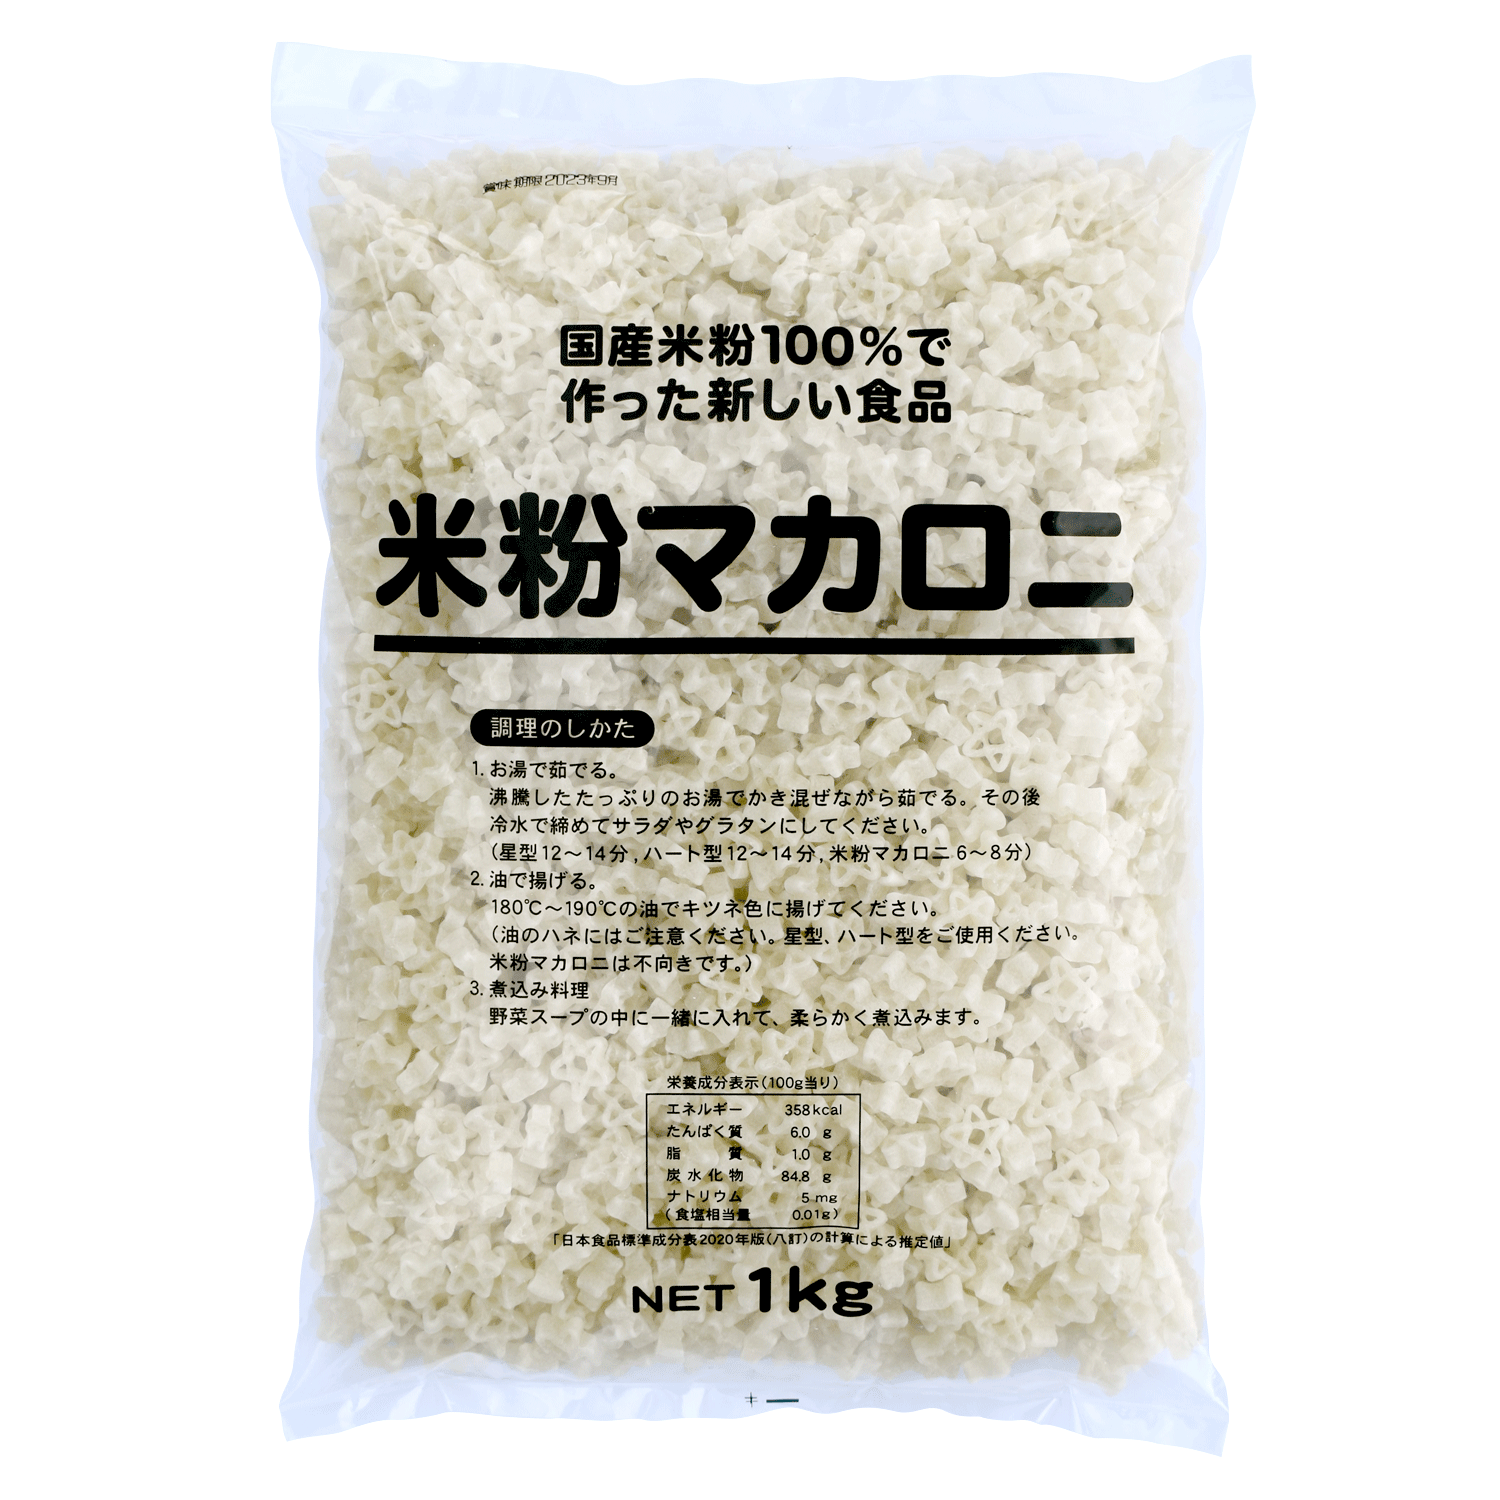  rice flour ma Caro ni1kg business use is possible to choose 3 kind rice flour pasta gru ton free ma Caro ni rice pasta rice flour noodle salad gratin soup school . meal child care . kindergarten 